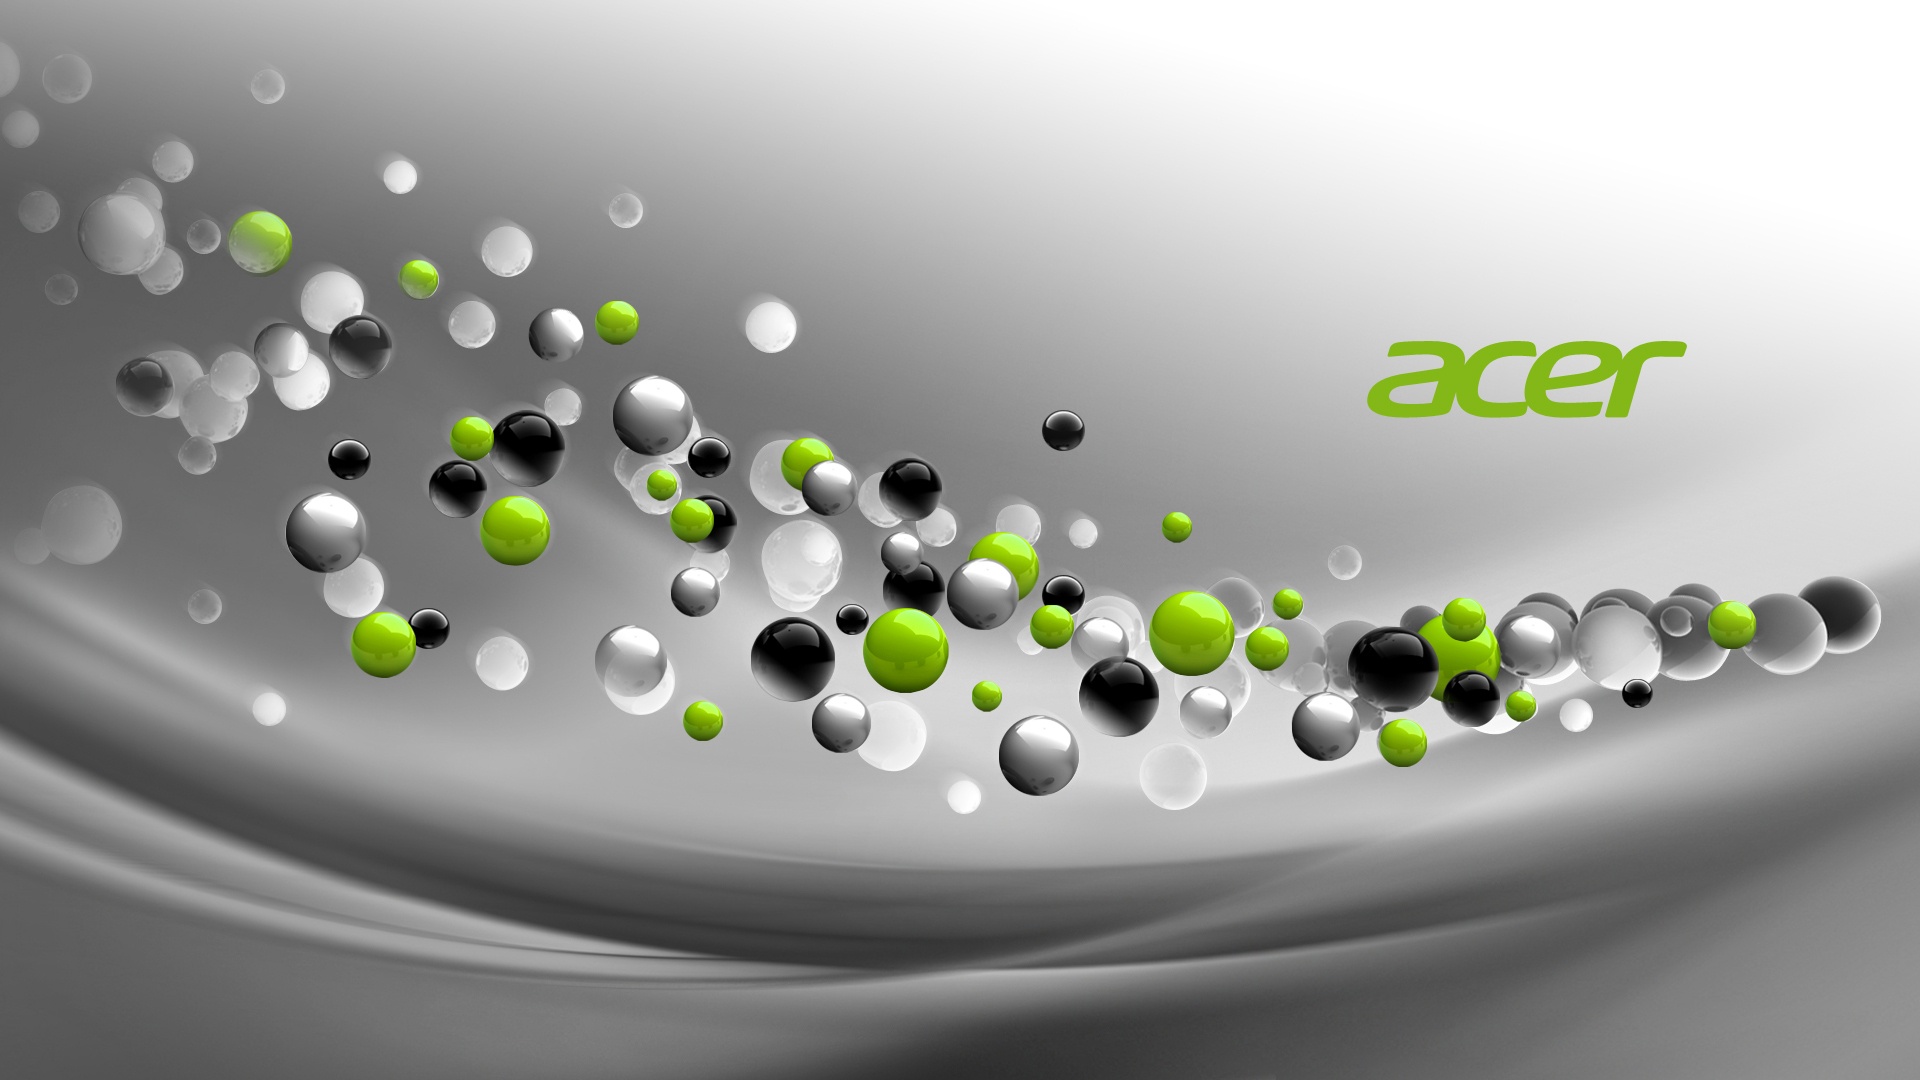 Acer Aspire Theme Wallpapers   1920x1080   306577